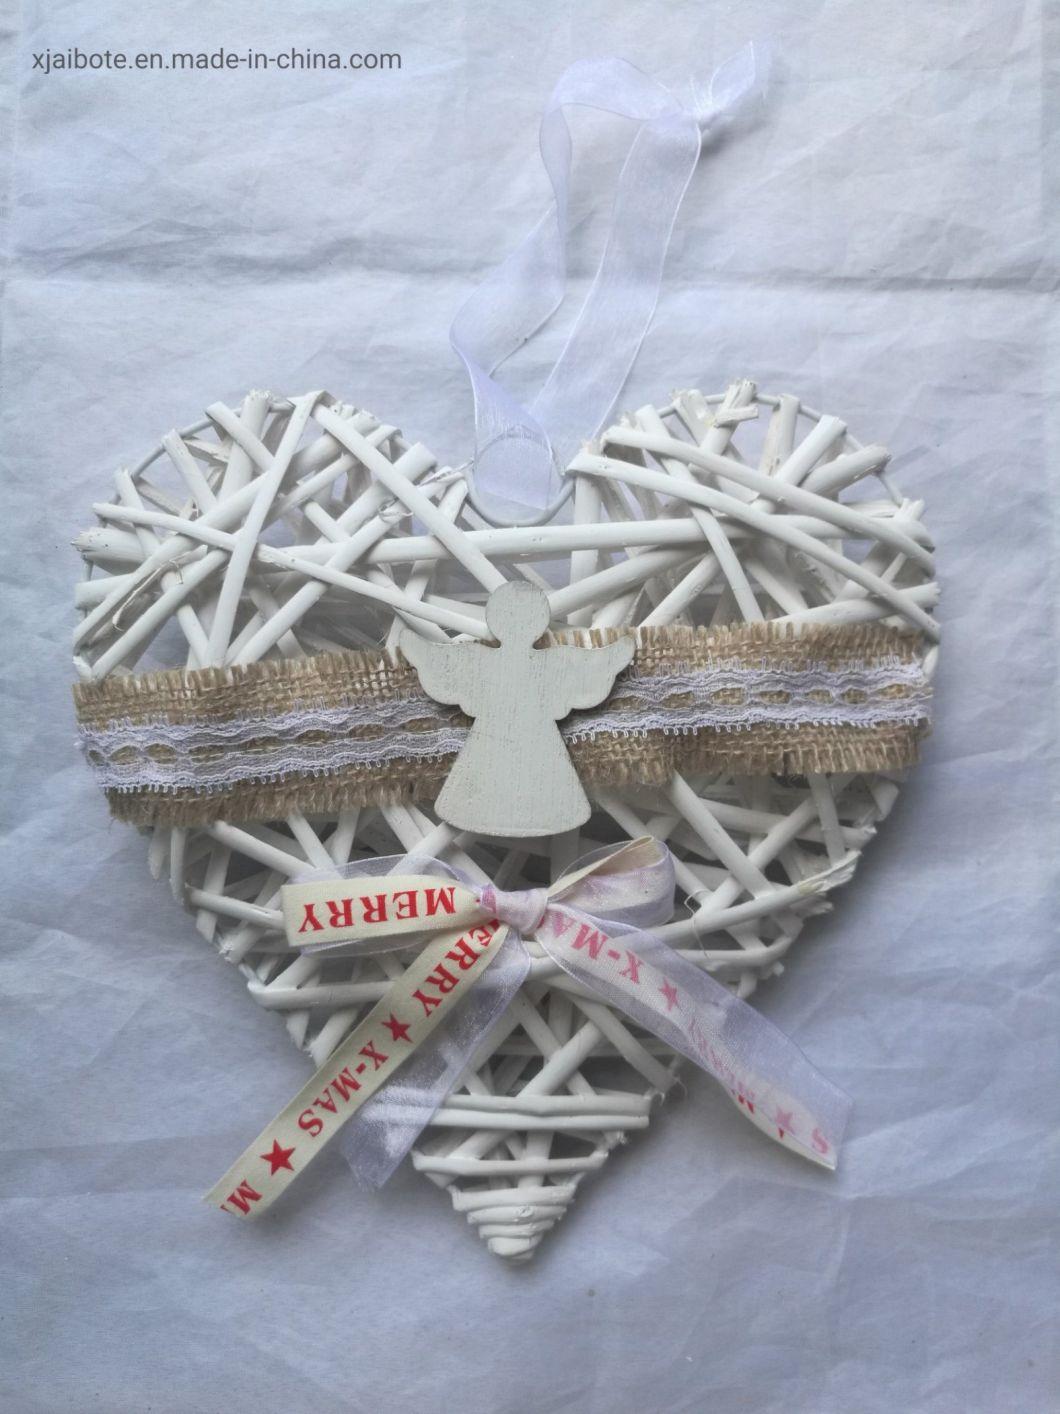 Customized Heart-Shaped Wicker Home Ornaments